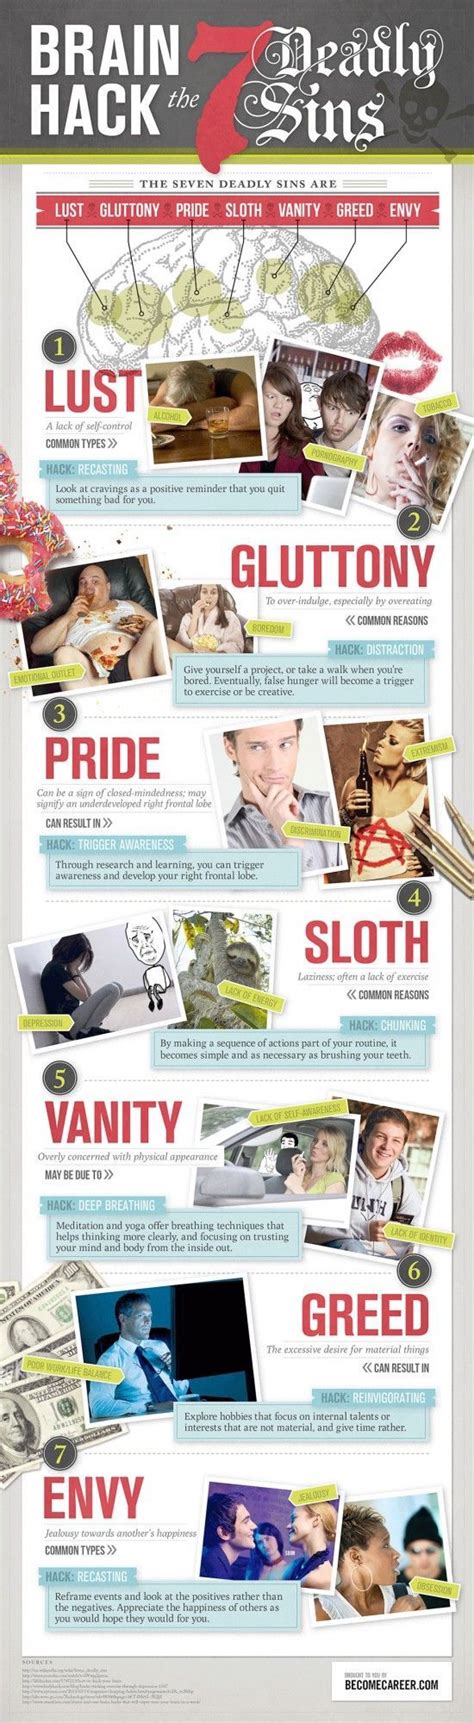 Psychology Infographic Brain Hack The Seven Deadly Sins